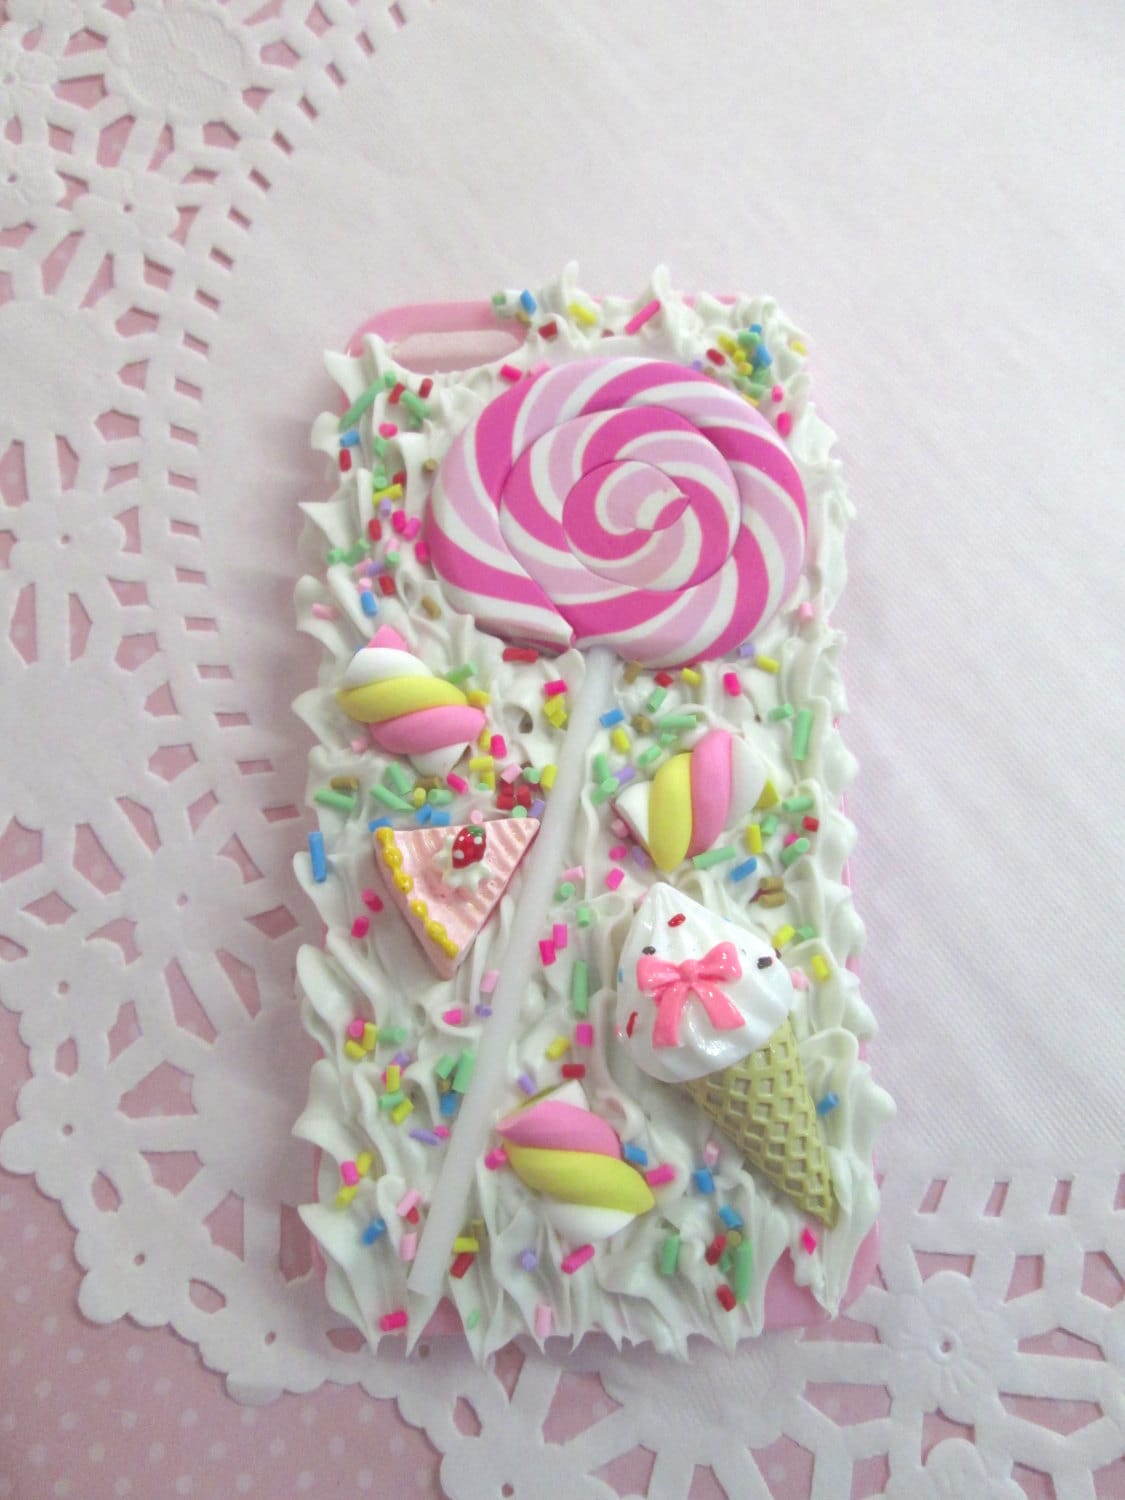 Chocolate decoden cream, 100ml tube, with 5 icing tips